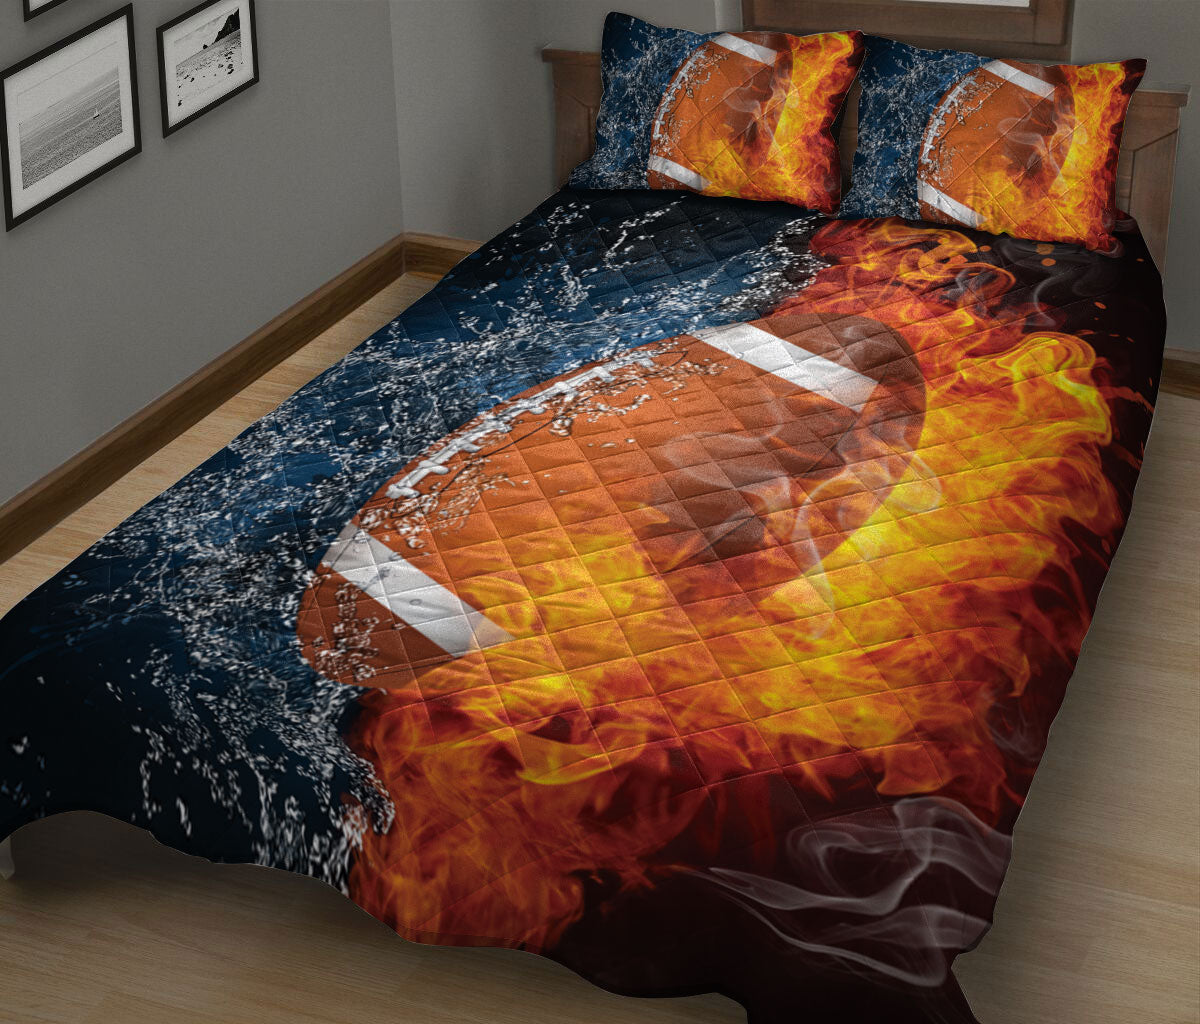 Ohaprints-Quilt-Bed-Set-Pillowcase-American-Football-Ball-Fire-&-Water-Unique-Gift-For-Sports-Lover-Red-&-Blue-Blanket-Bedspread-Bedding-2607-King (90'' x 100'')